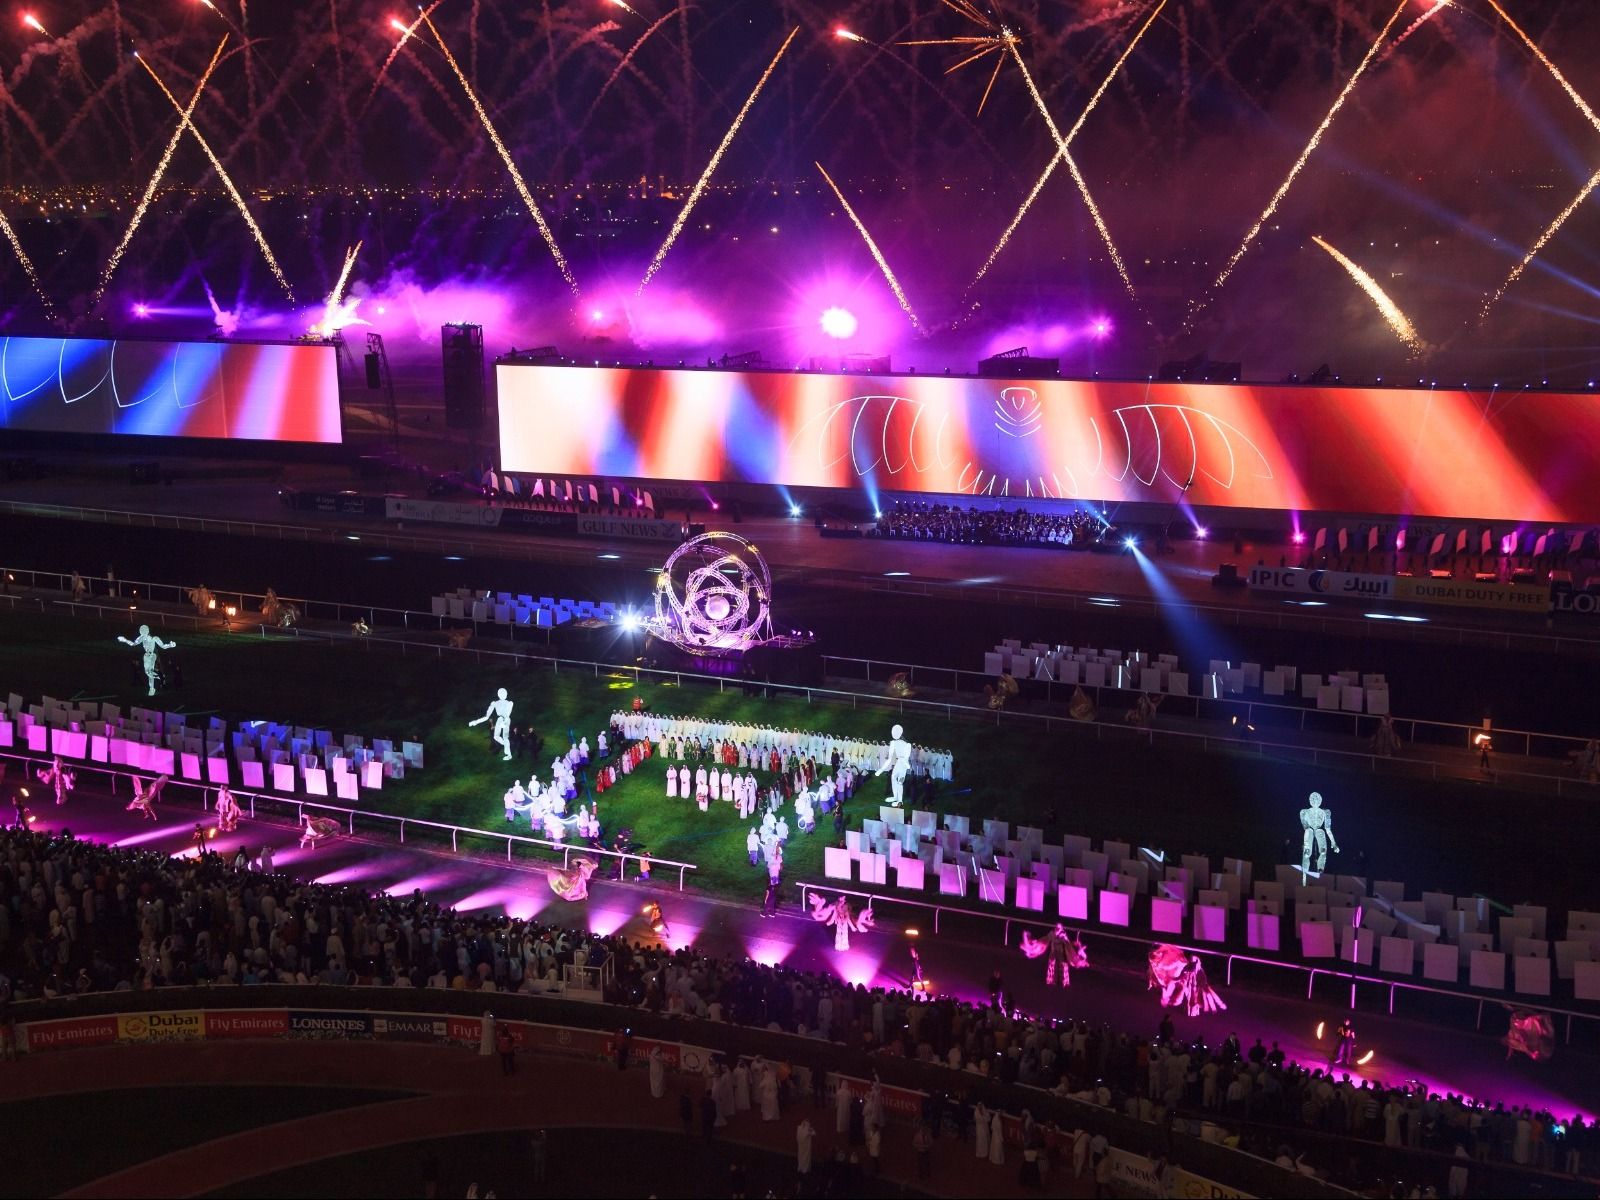 Curating And Broadcasting Compelling Opening And Closing Ceremonies For The Dubai World Cup 2450